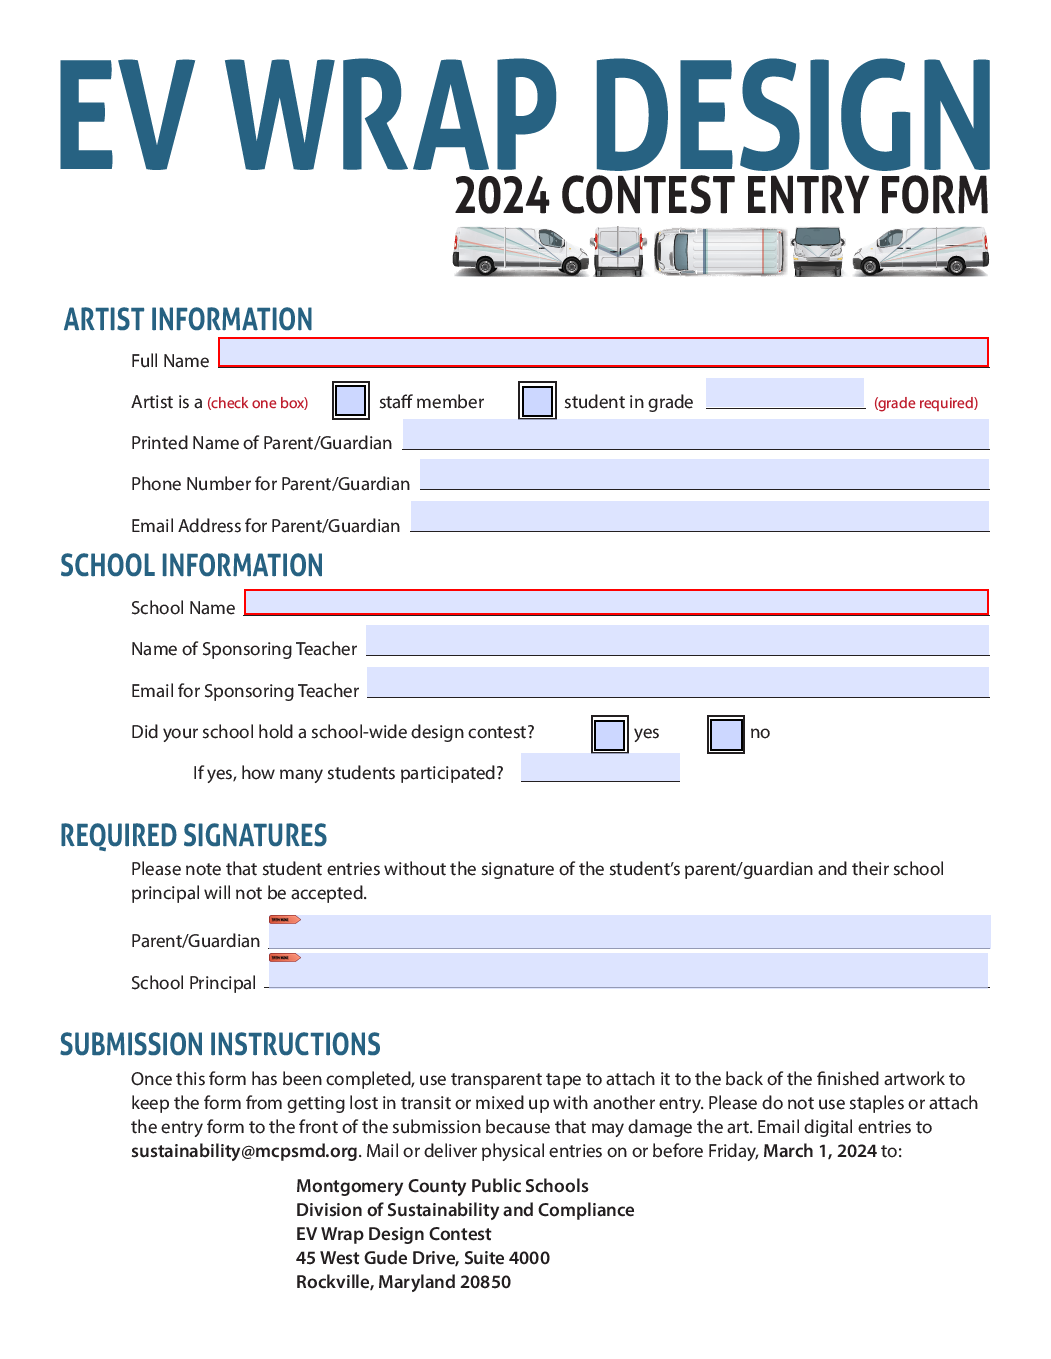 image of the contest entry form